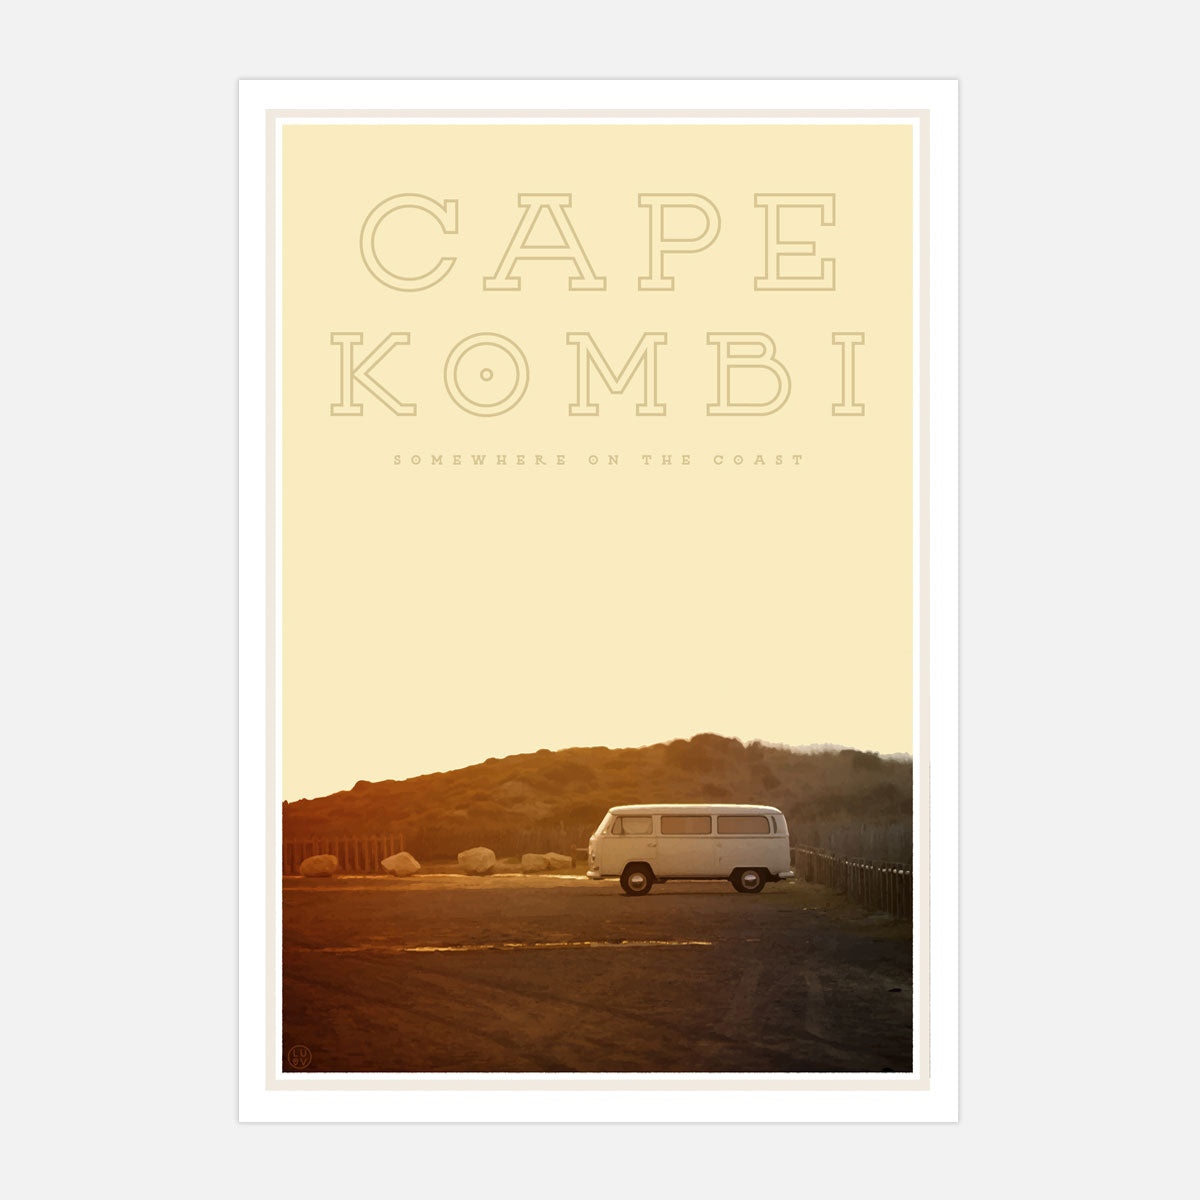 Kombi vintage travel style poster by places we luv sydney